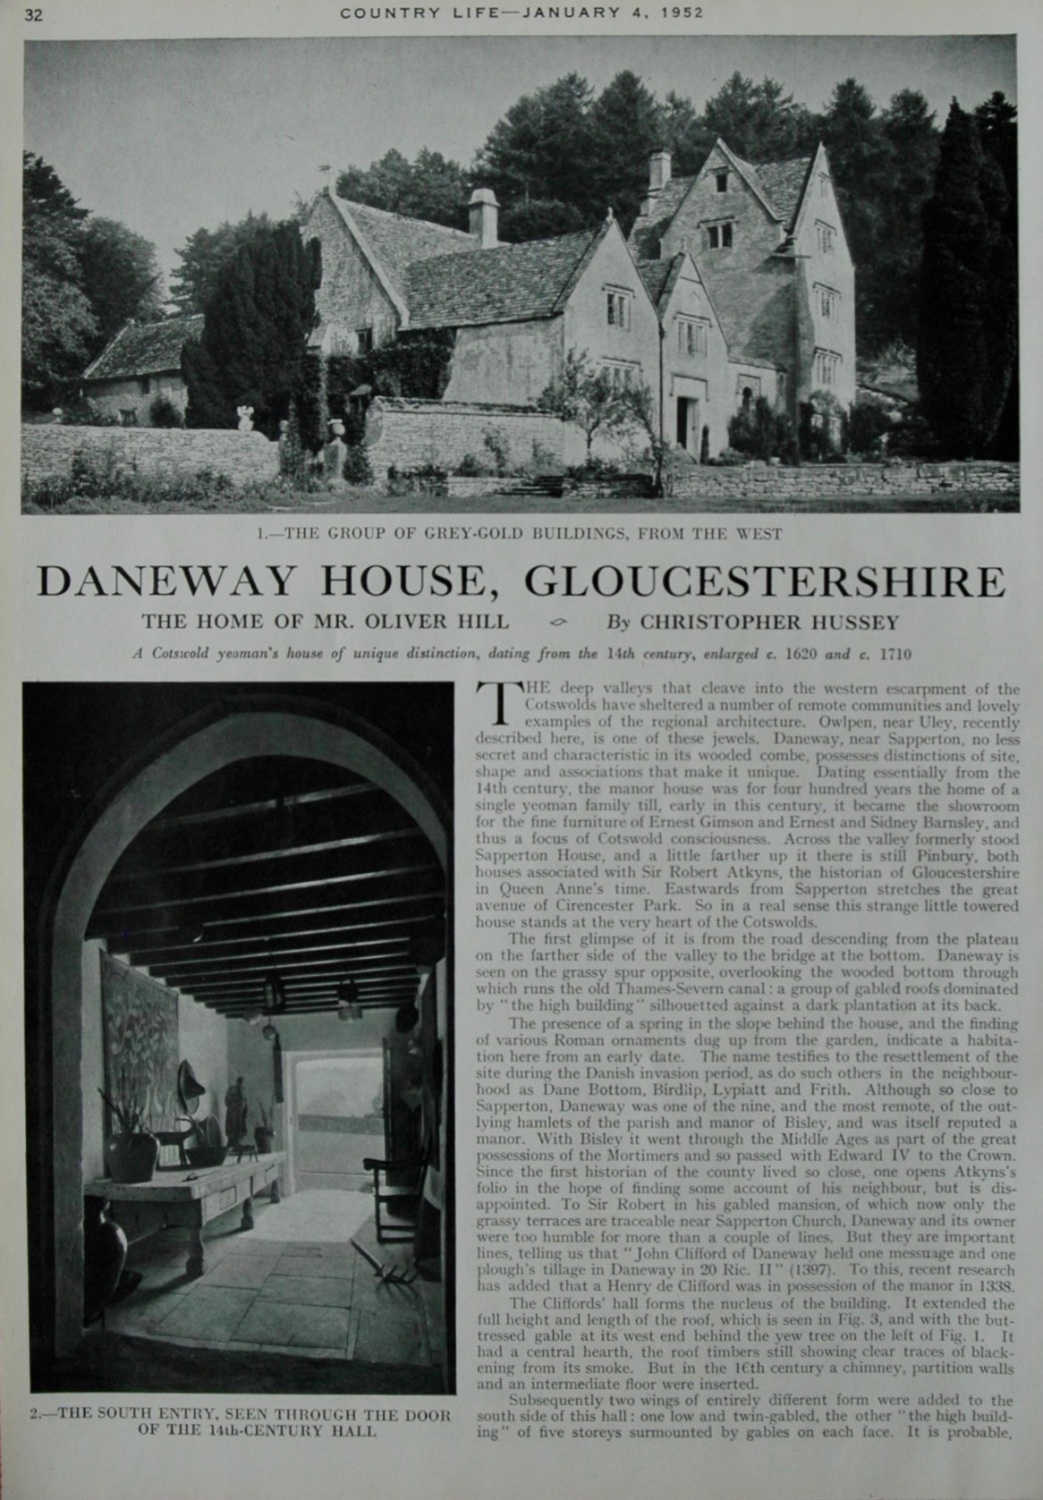 Country Life - Daneway House, Gloucestershire